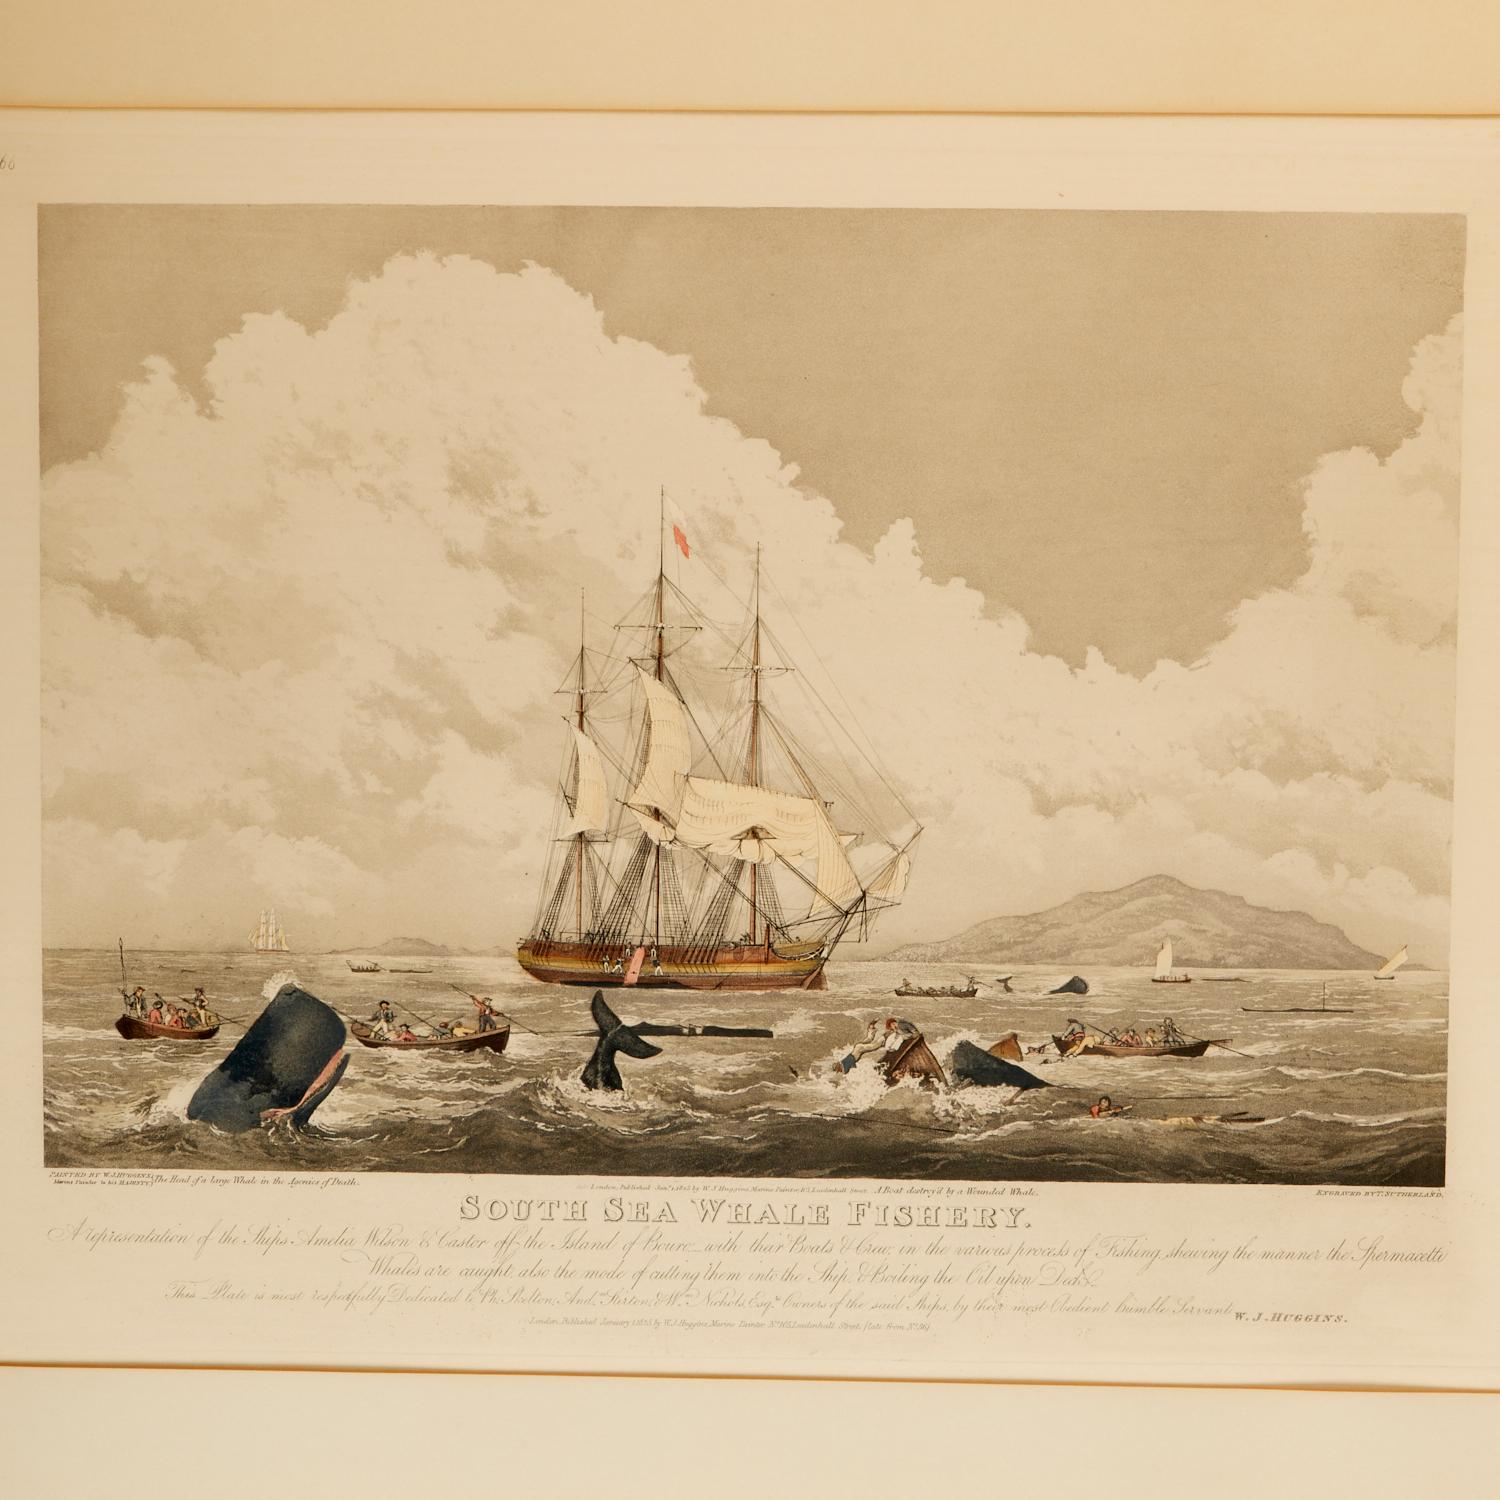 A hand-colored aquatint engraving dated January 1, 1825 and engraved by T. Sutherland, London. Titled 